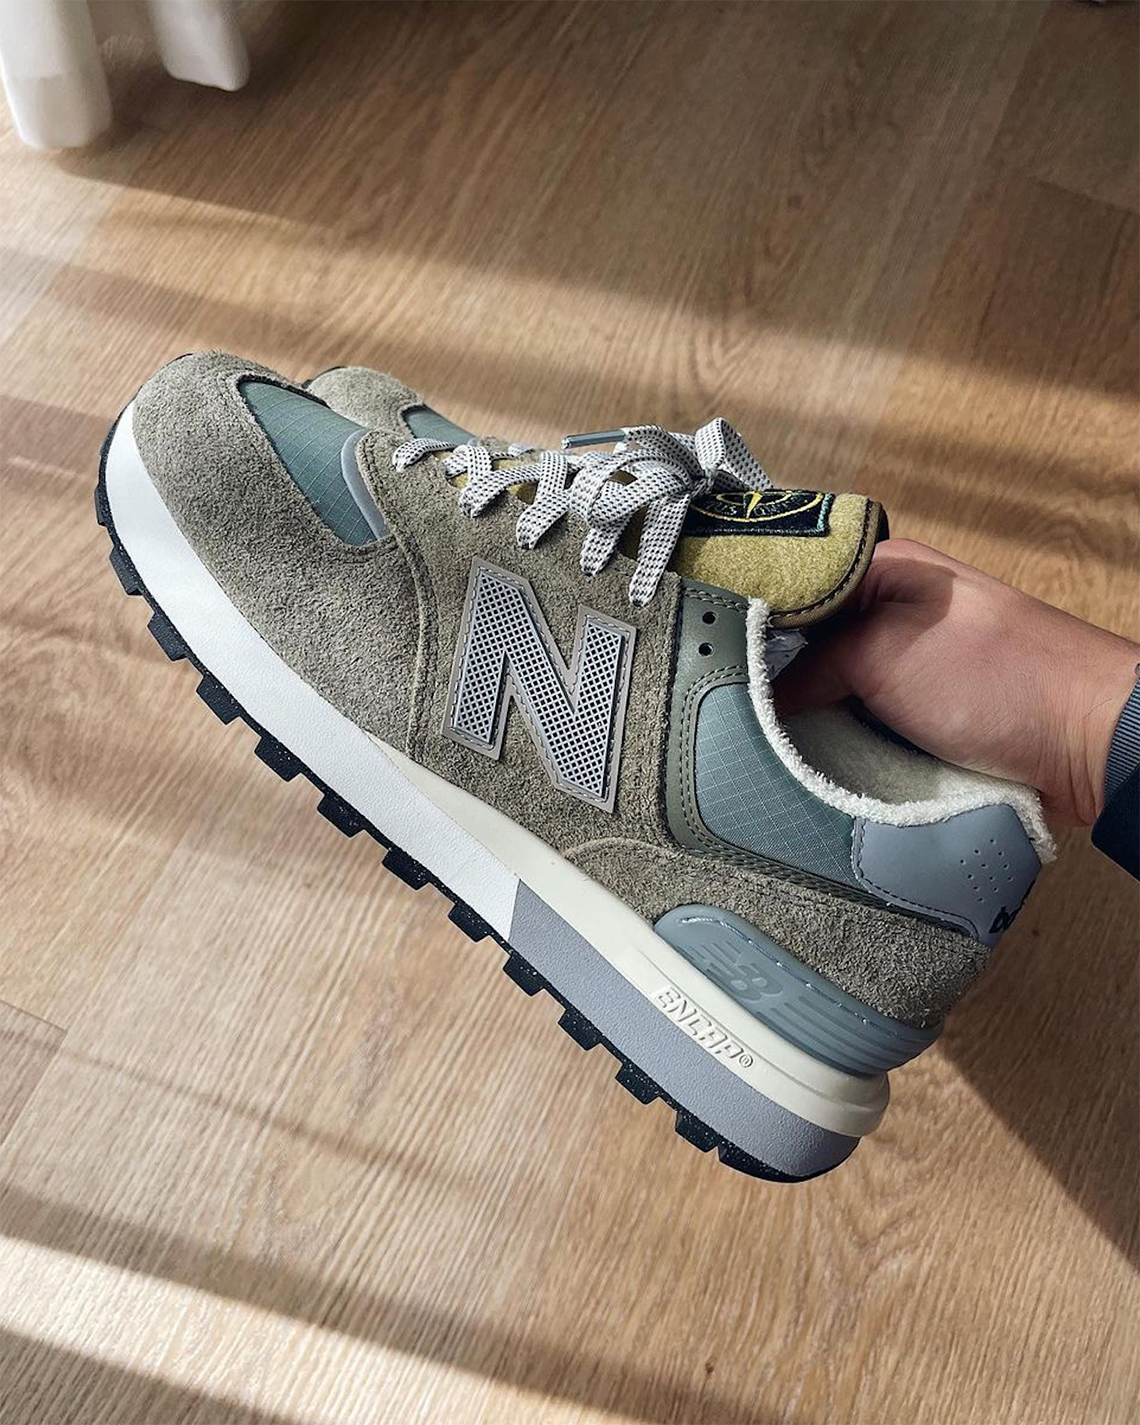 This New Balance 990v1 comes dressed in a hue similar to the